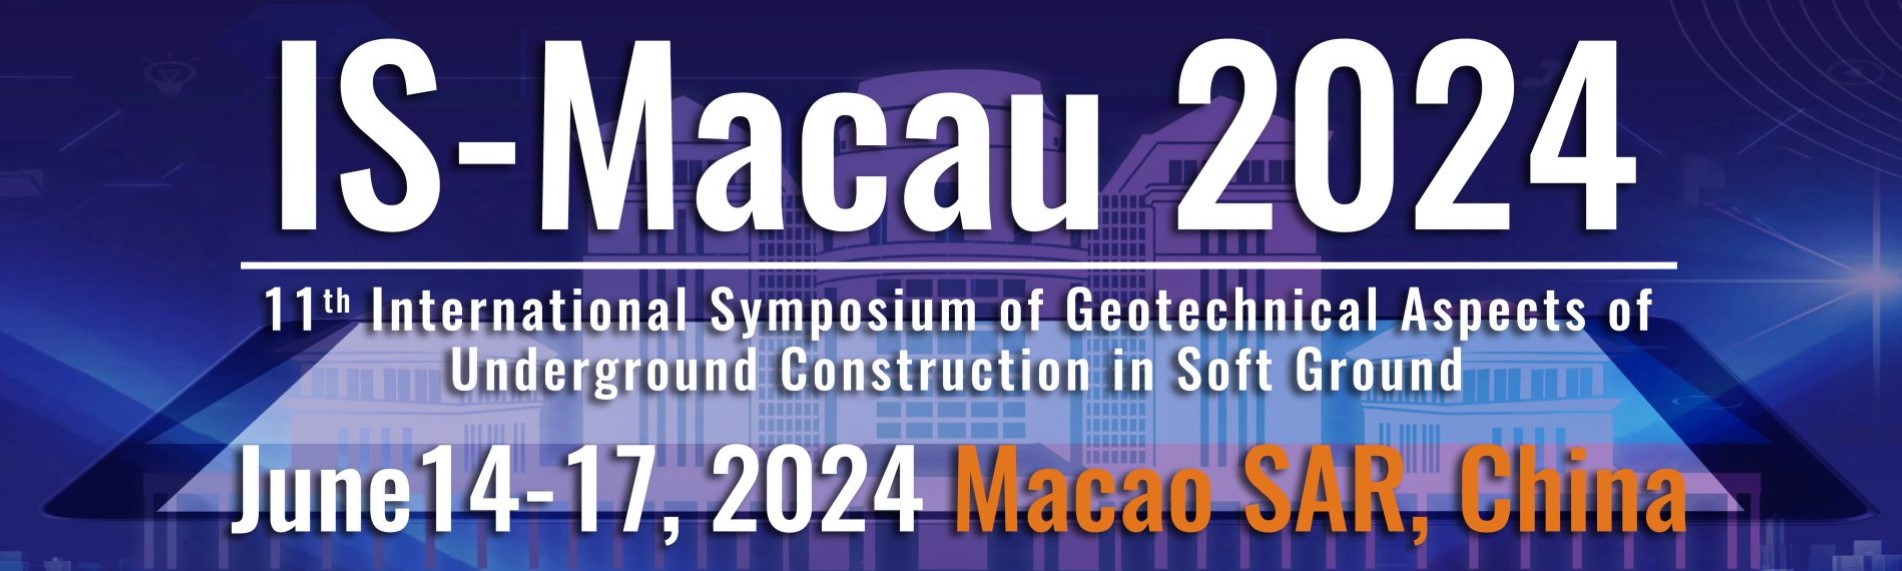 11th International Symposium of Geotechnical Aspects of Underground Construction in Soft Ground (IS-Macau 2024)